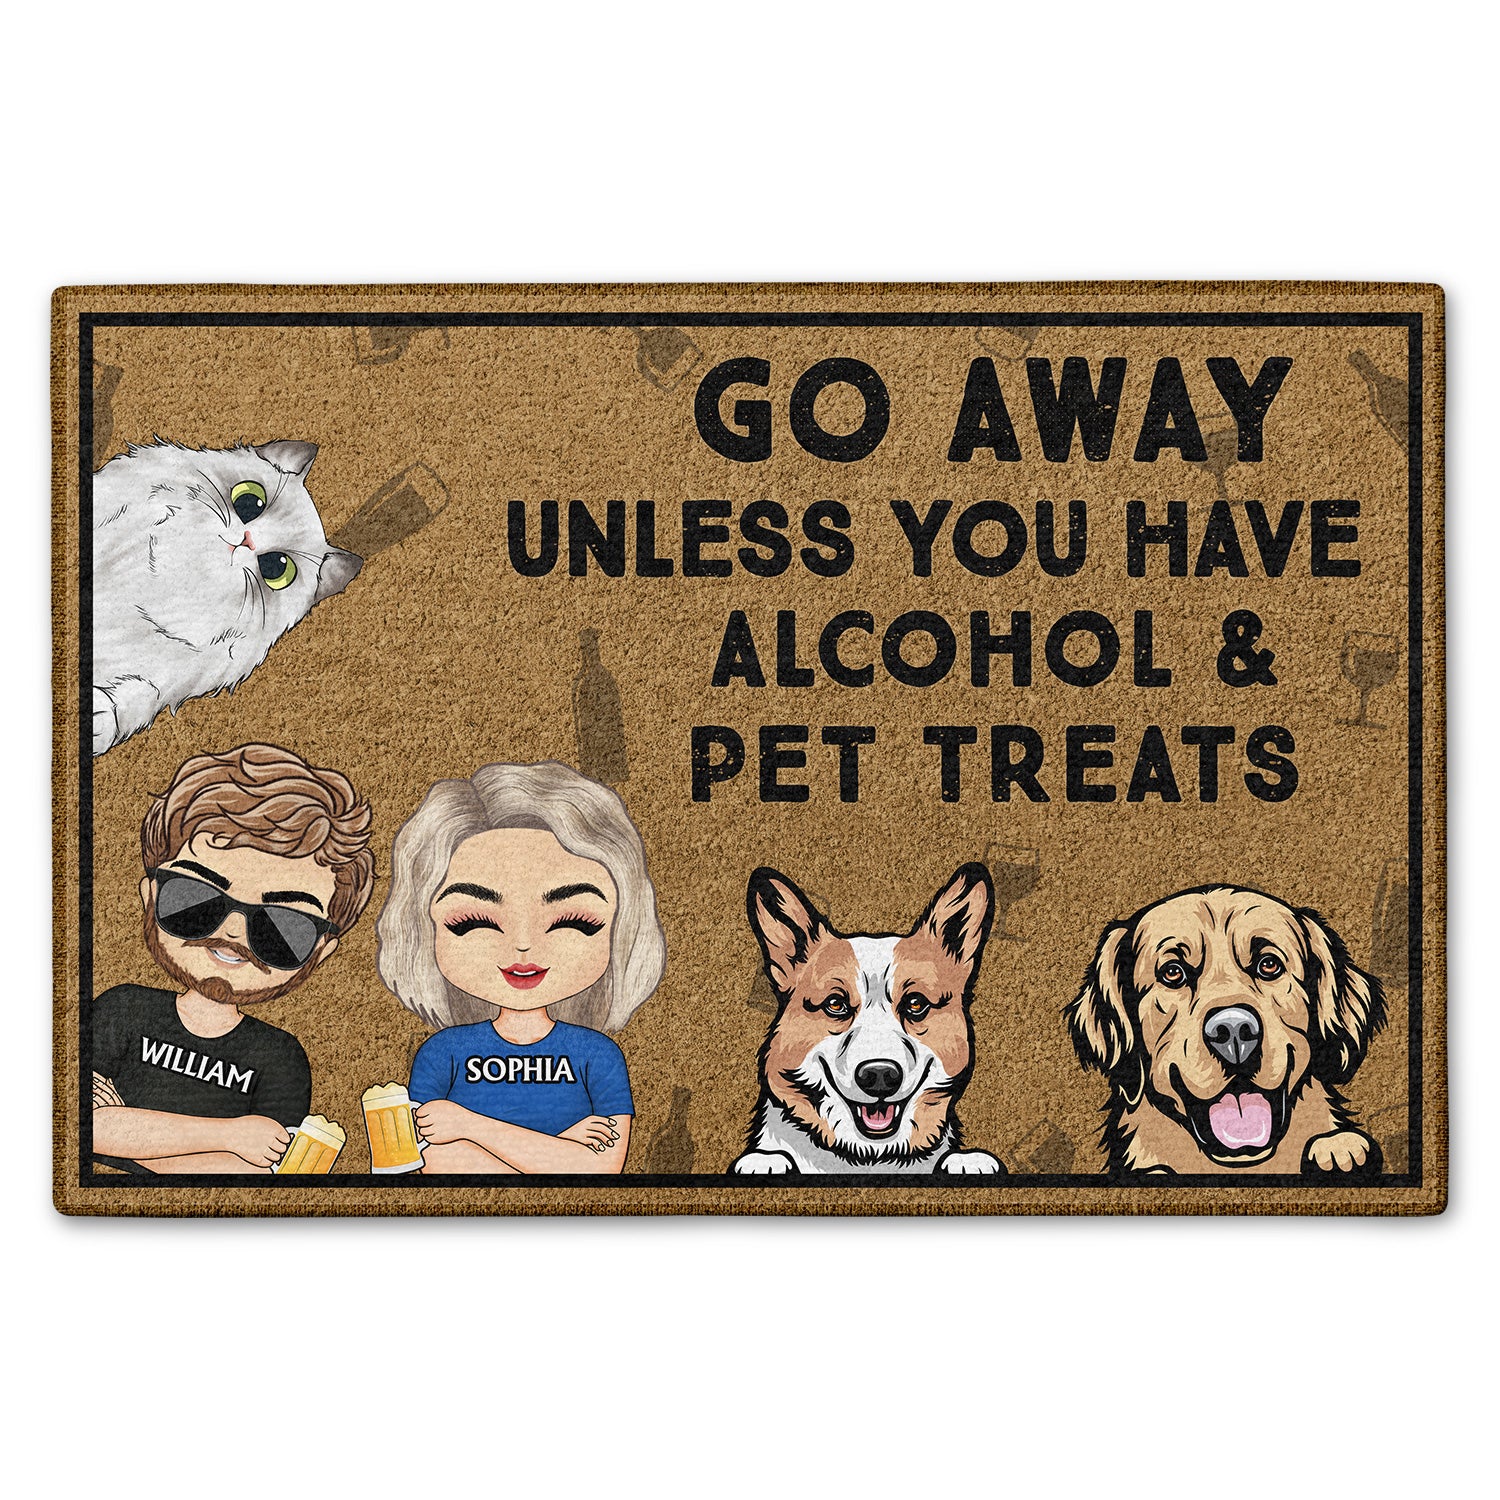 Go Away Unless You Have Alcohol And Dog Treats Cat Treats Pet Treats Chibi Couples - Home Decor, Birthday, Housewarming Gift For Dog Lovers & Cat Lovers - Personalized Custom Doormat